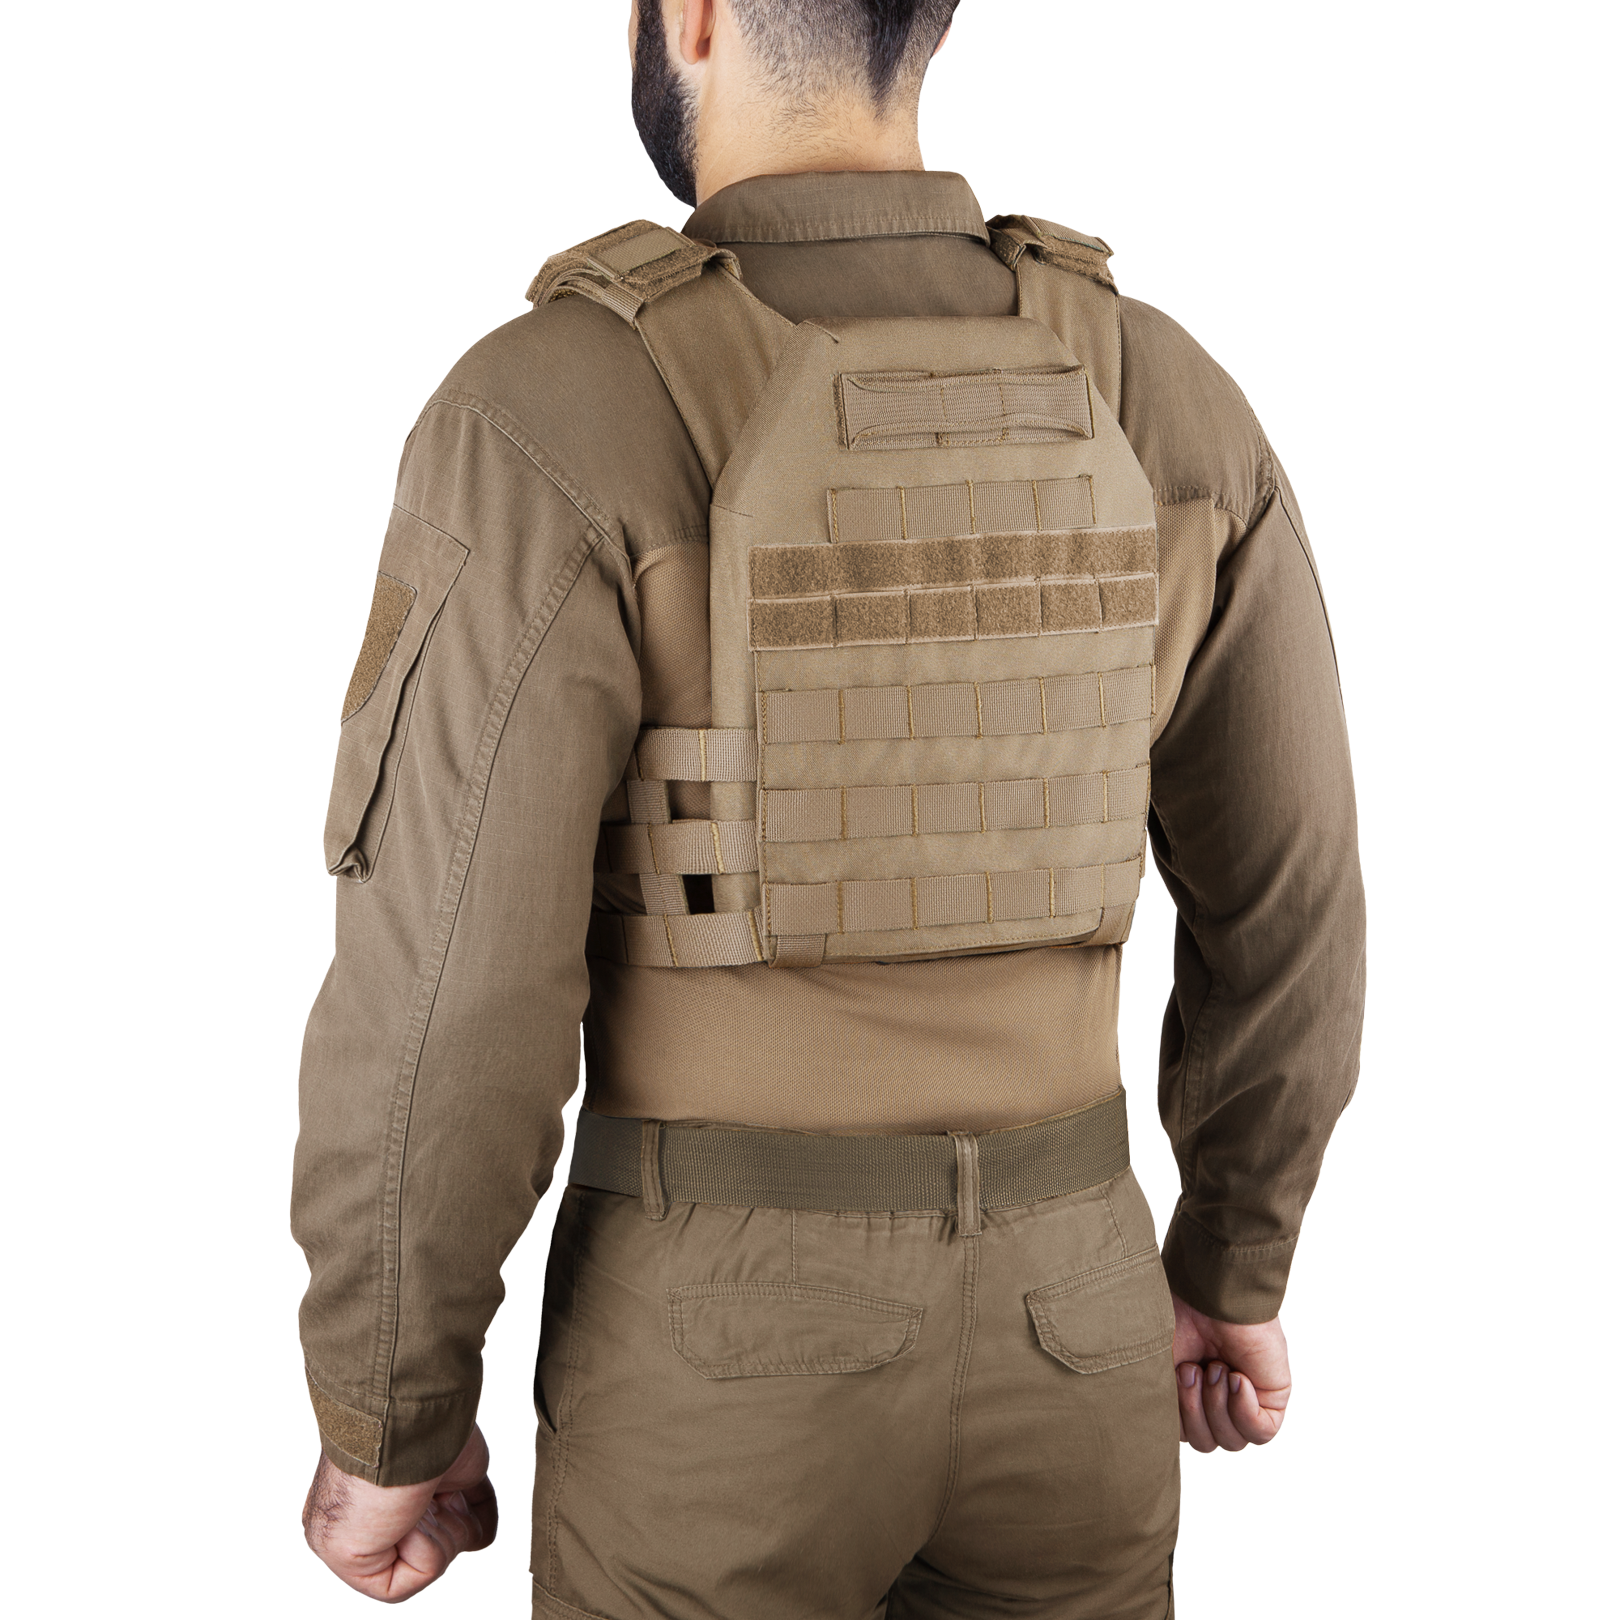 Tactical Combat Level 3 Body Armor for Military, Army, Law